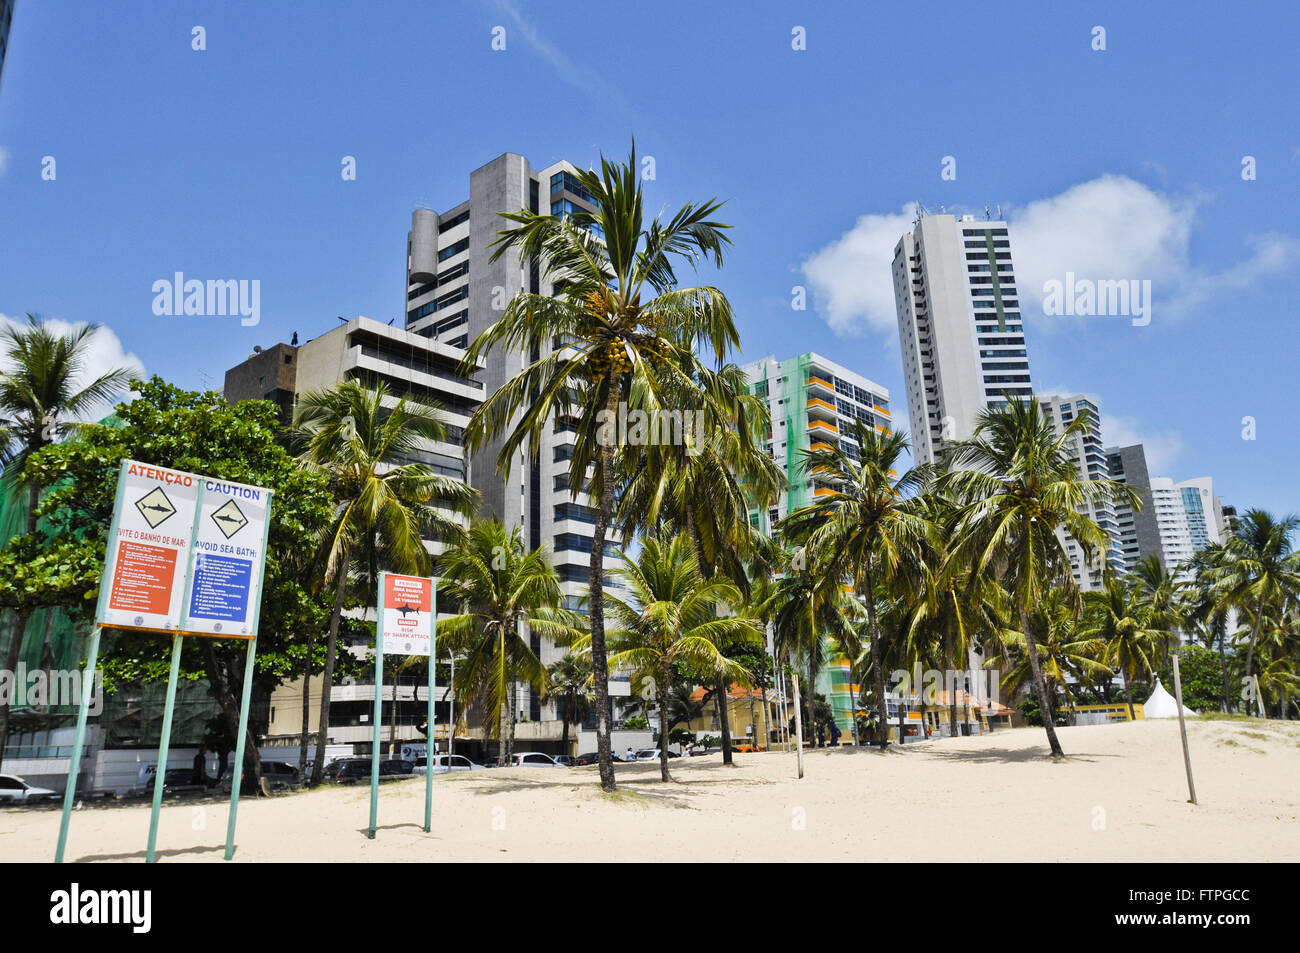 Signs with information about security against shark attack at Boa Viagem Beach Stock Photo